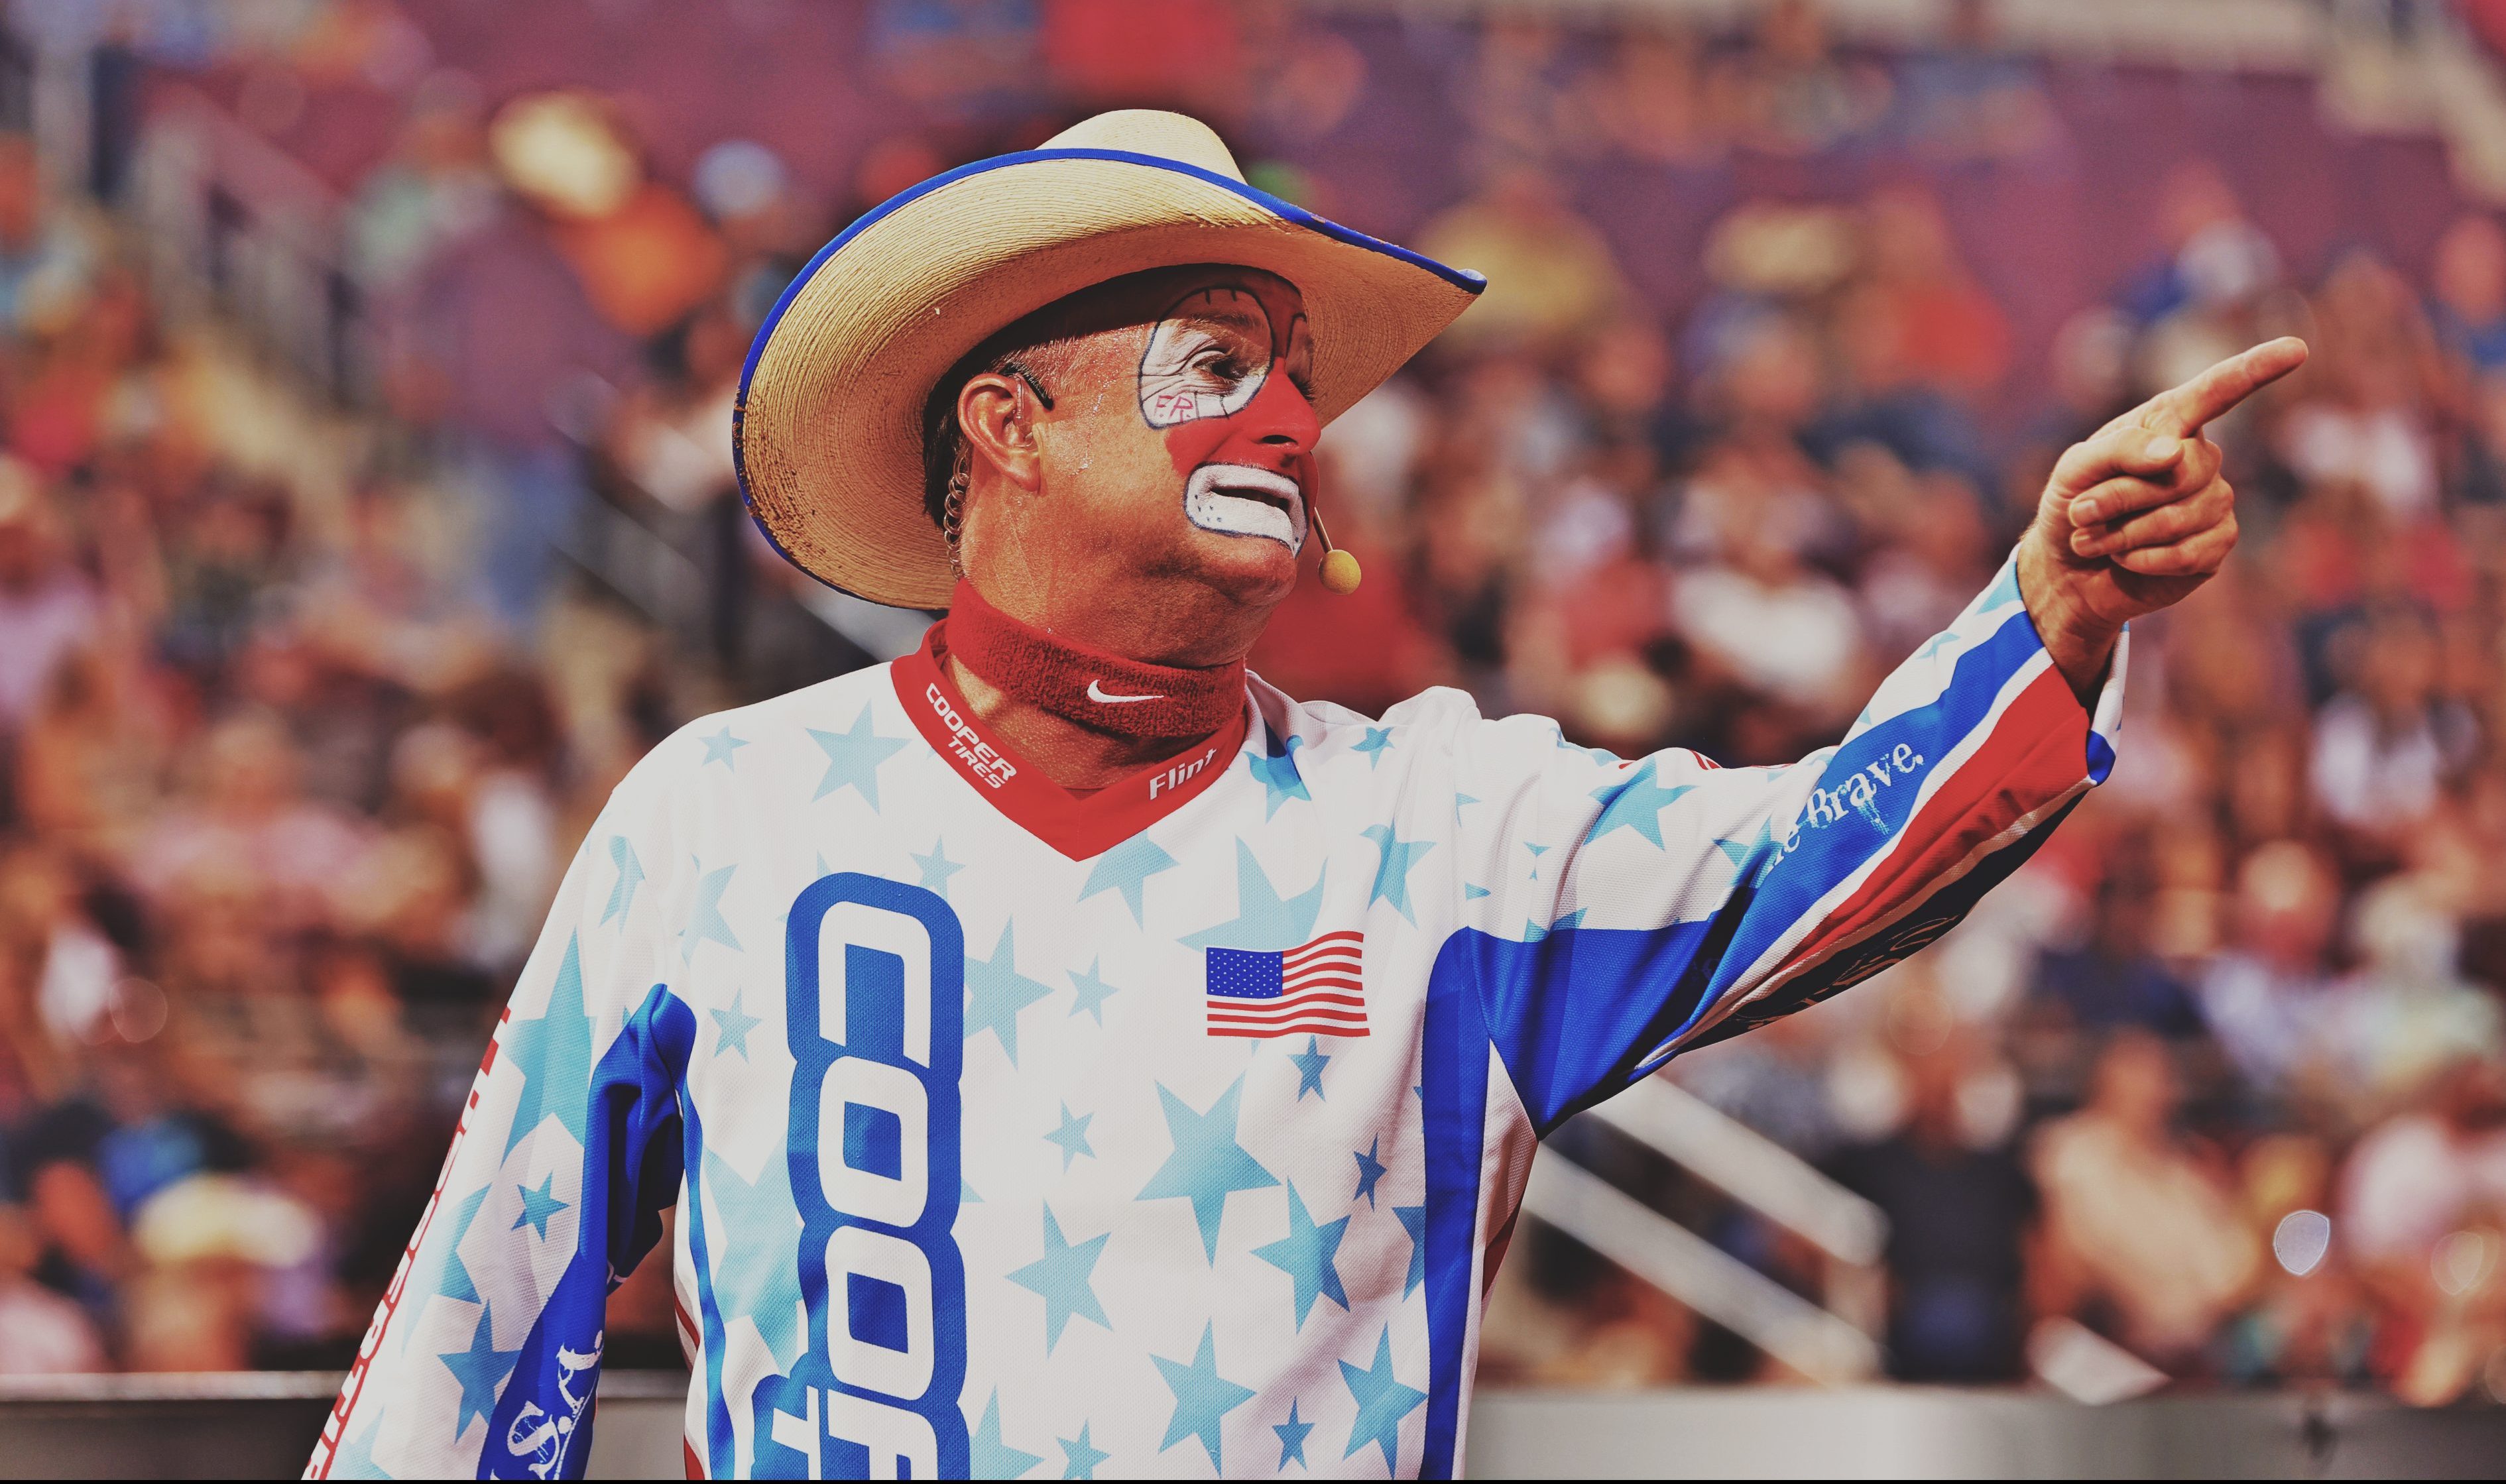 Who Is Flint Rasmussen? A Day In The Life Of PBR's Arena Entertainer